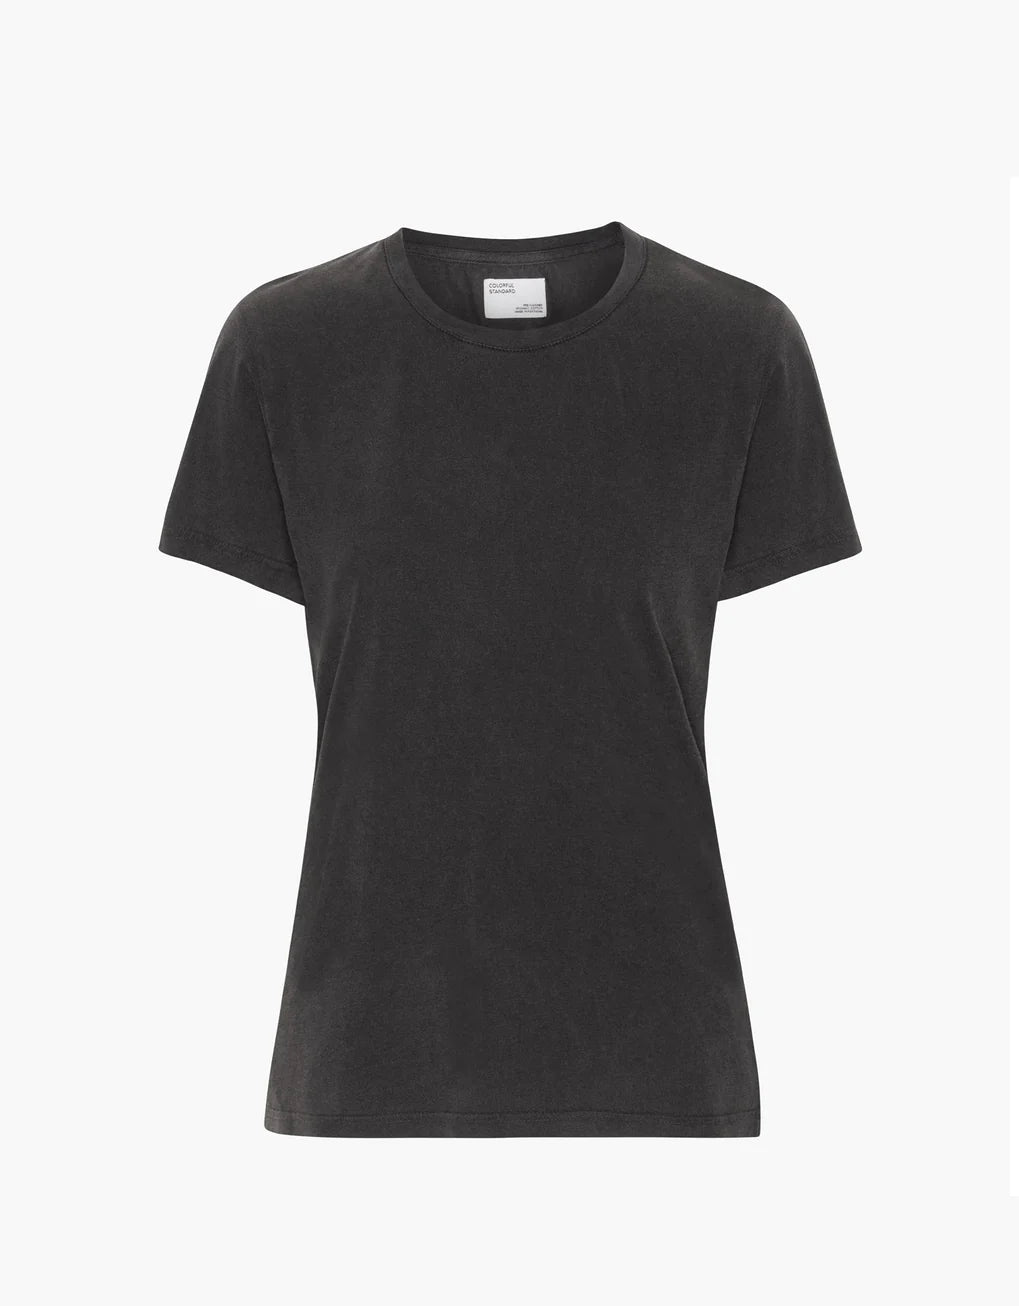 A Light Organic Tee made of organic cotton, with a round neck, by Colorful Standard.